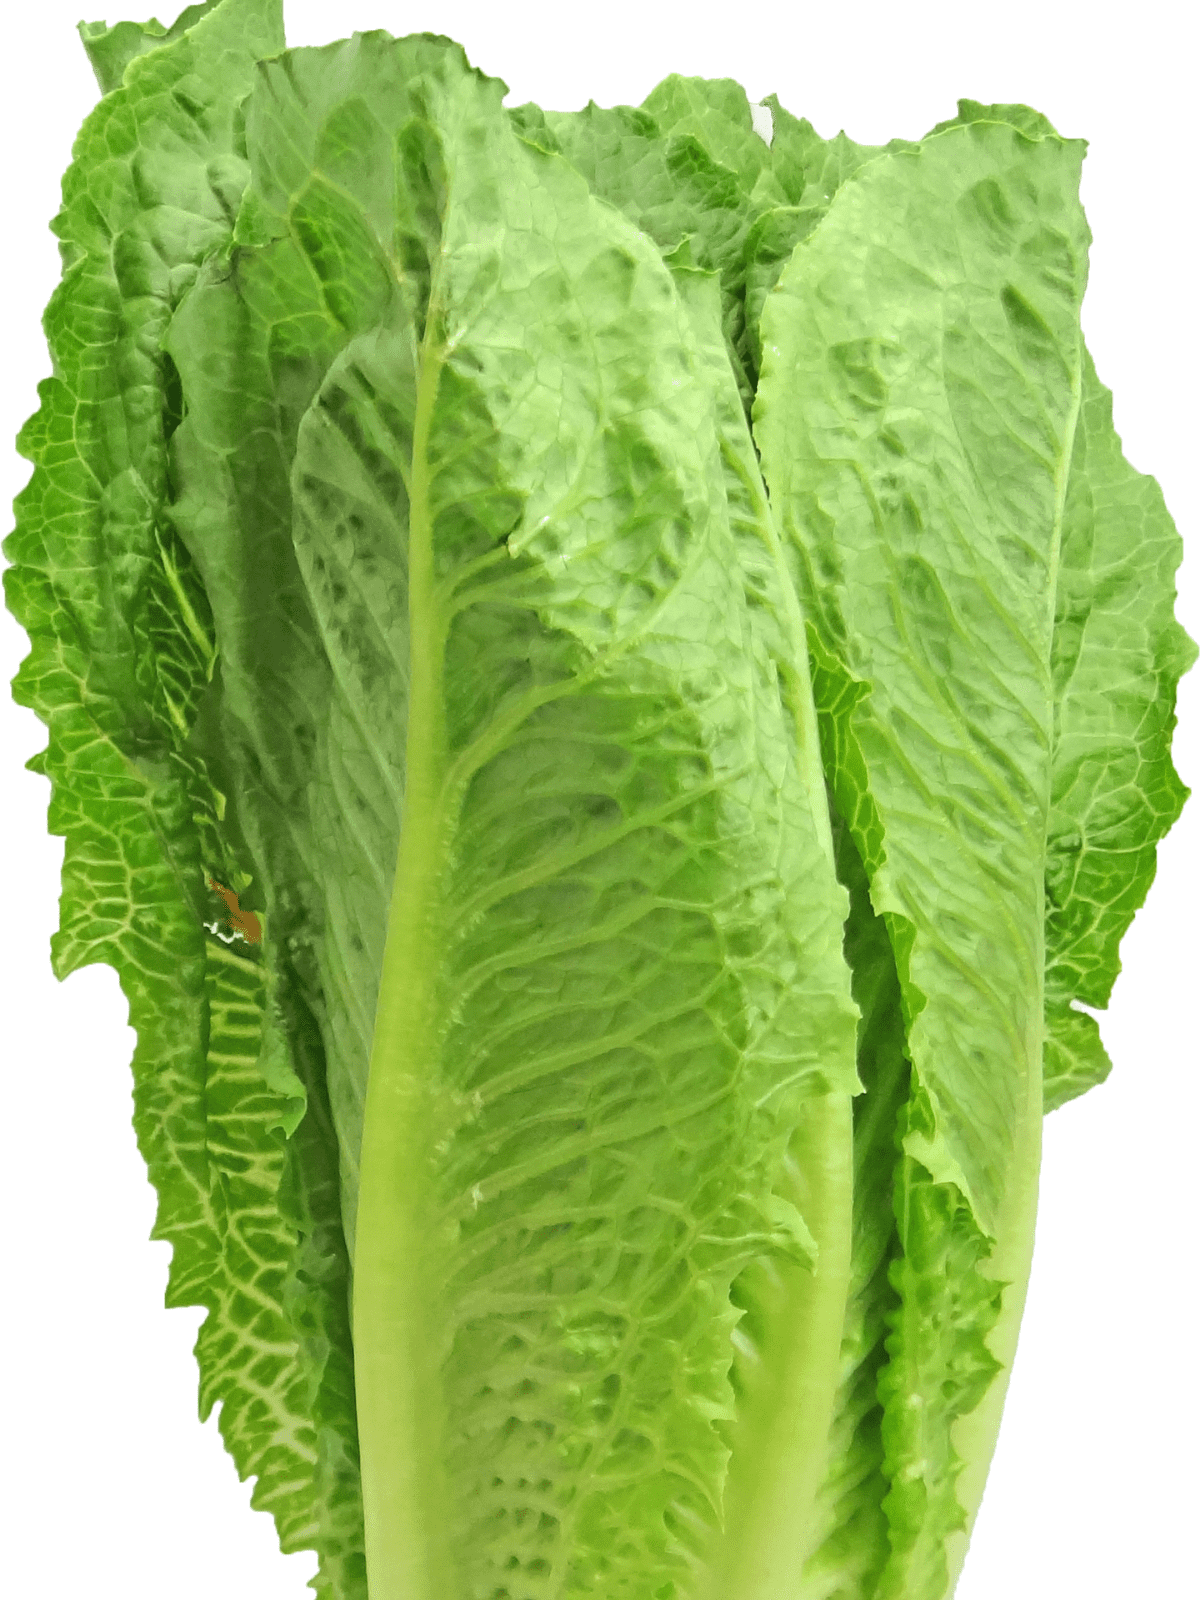 A large head of romaine lettuce. 